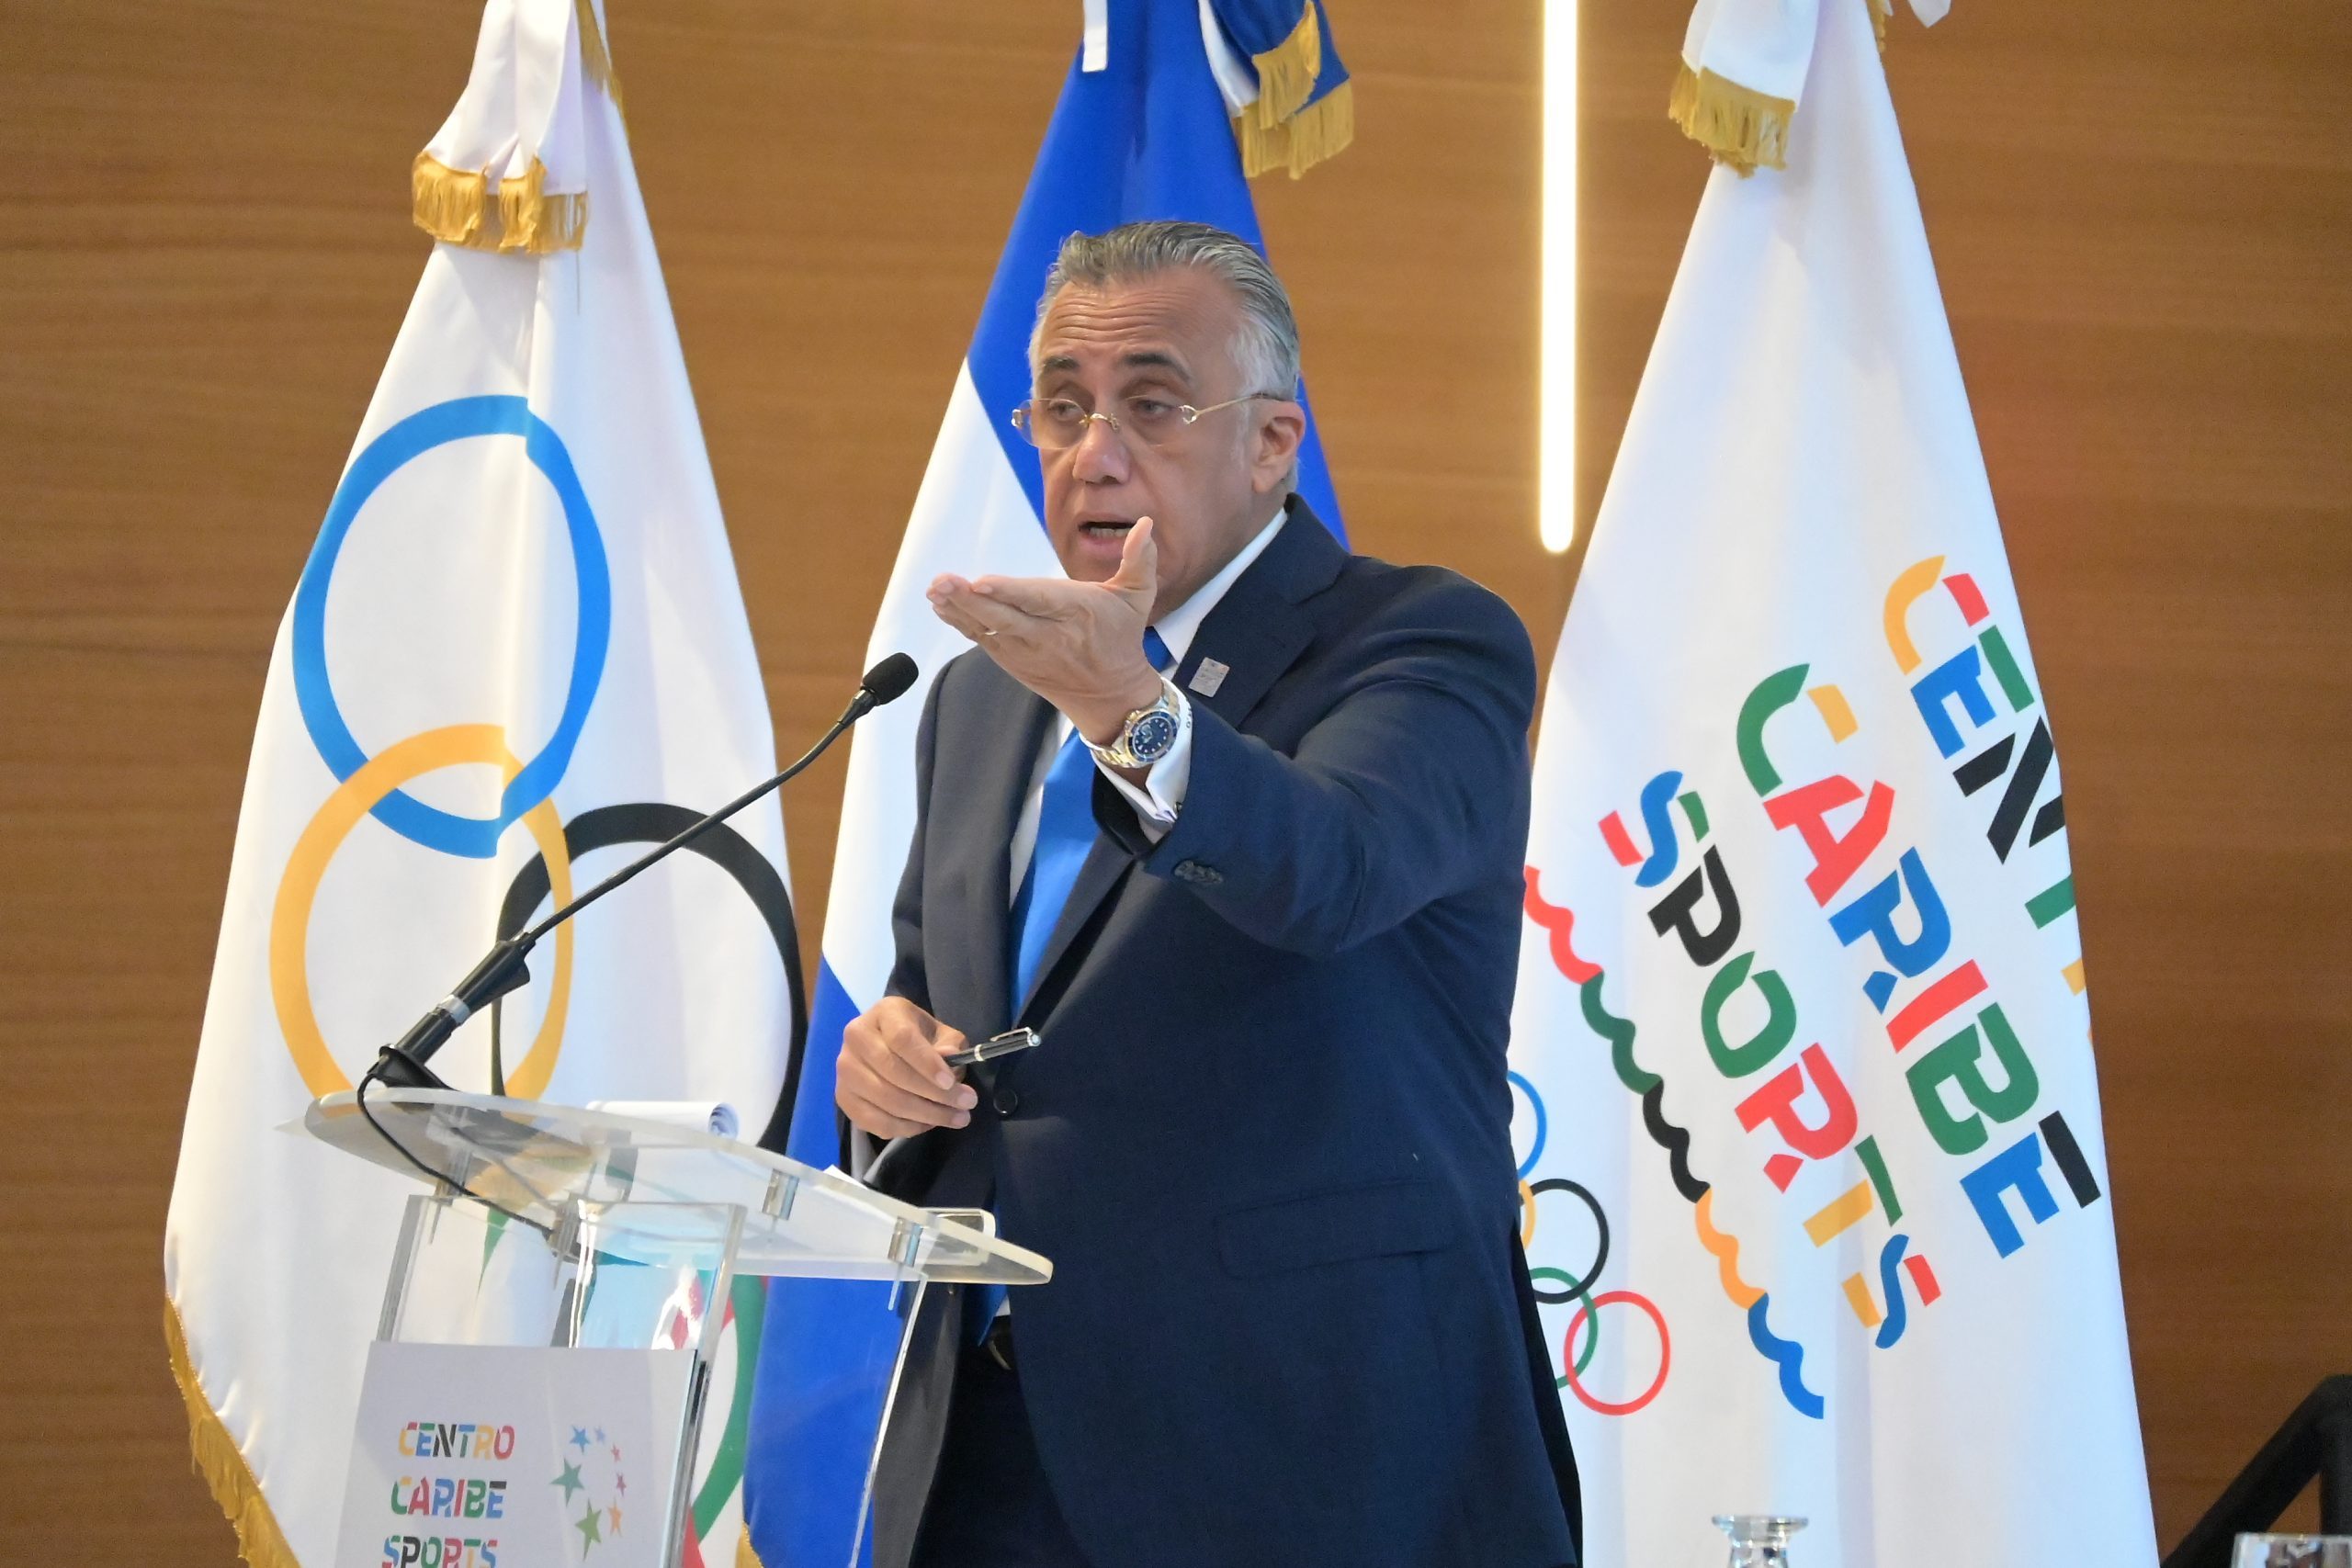 141st International Olympic Committee Session extends Luis Mejía IOC Member status